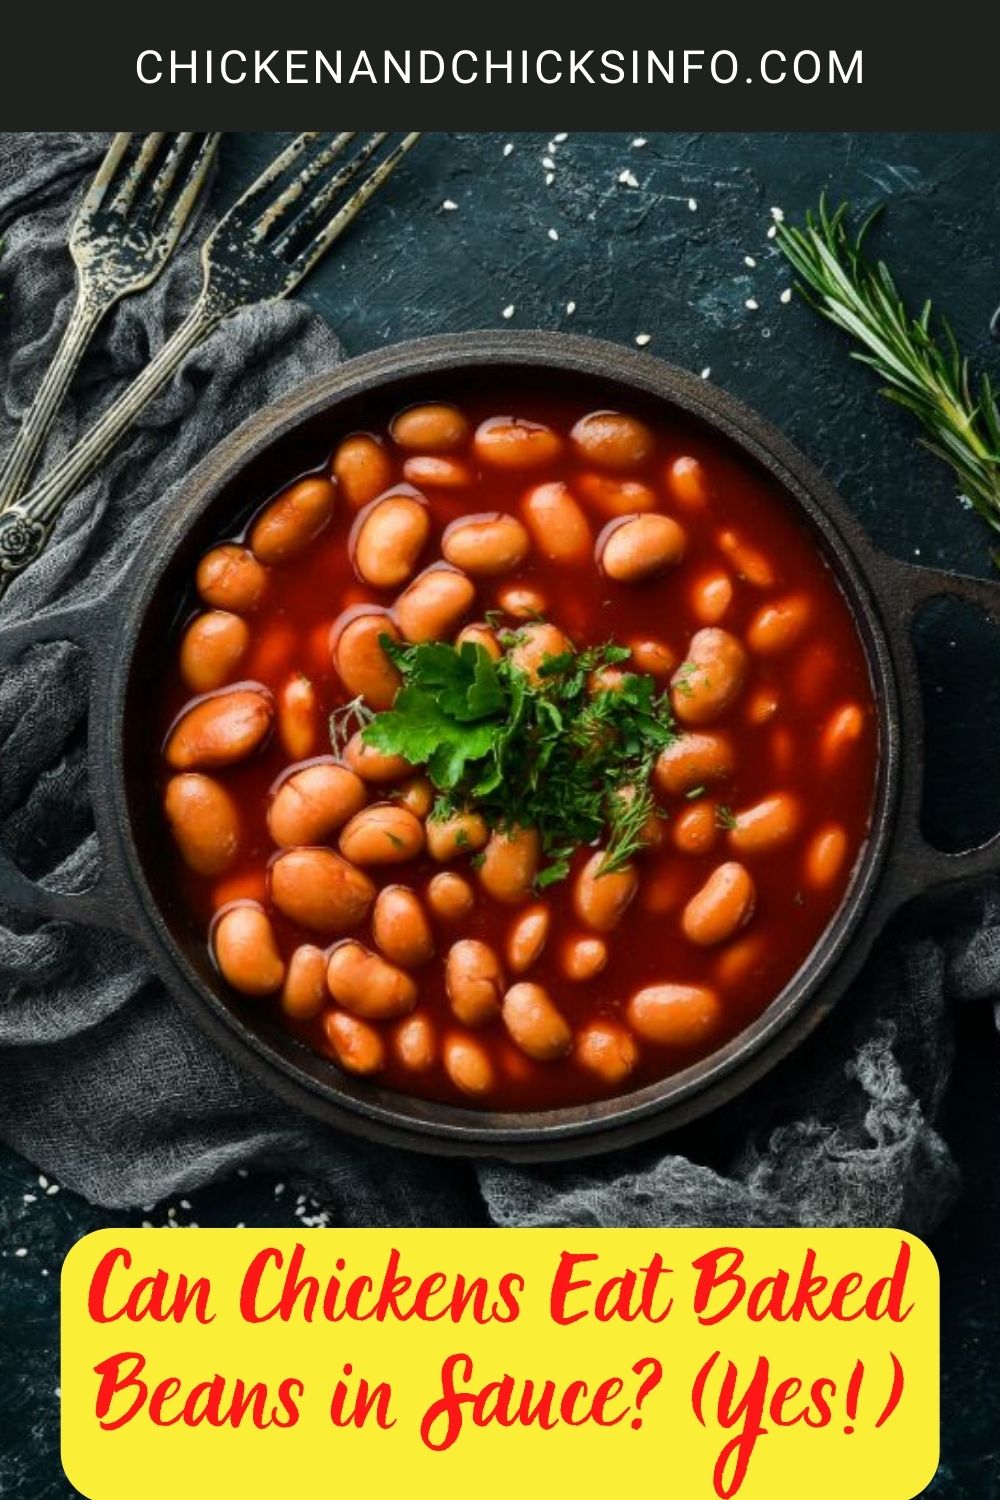 Can Chickens Eat Baked Beans in Sauce? (Yes!) poster.
